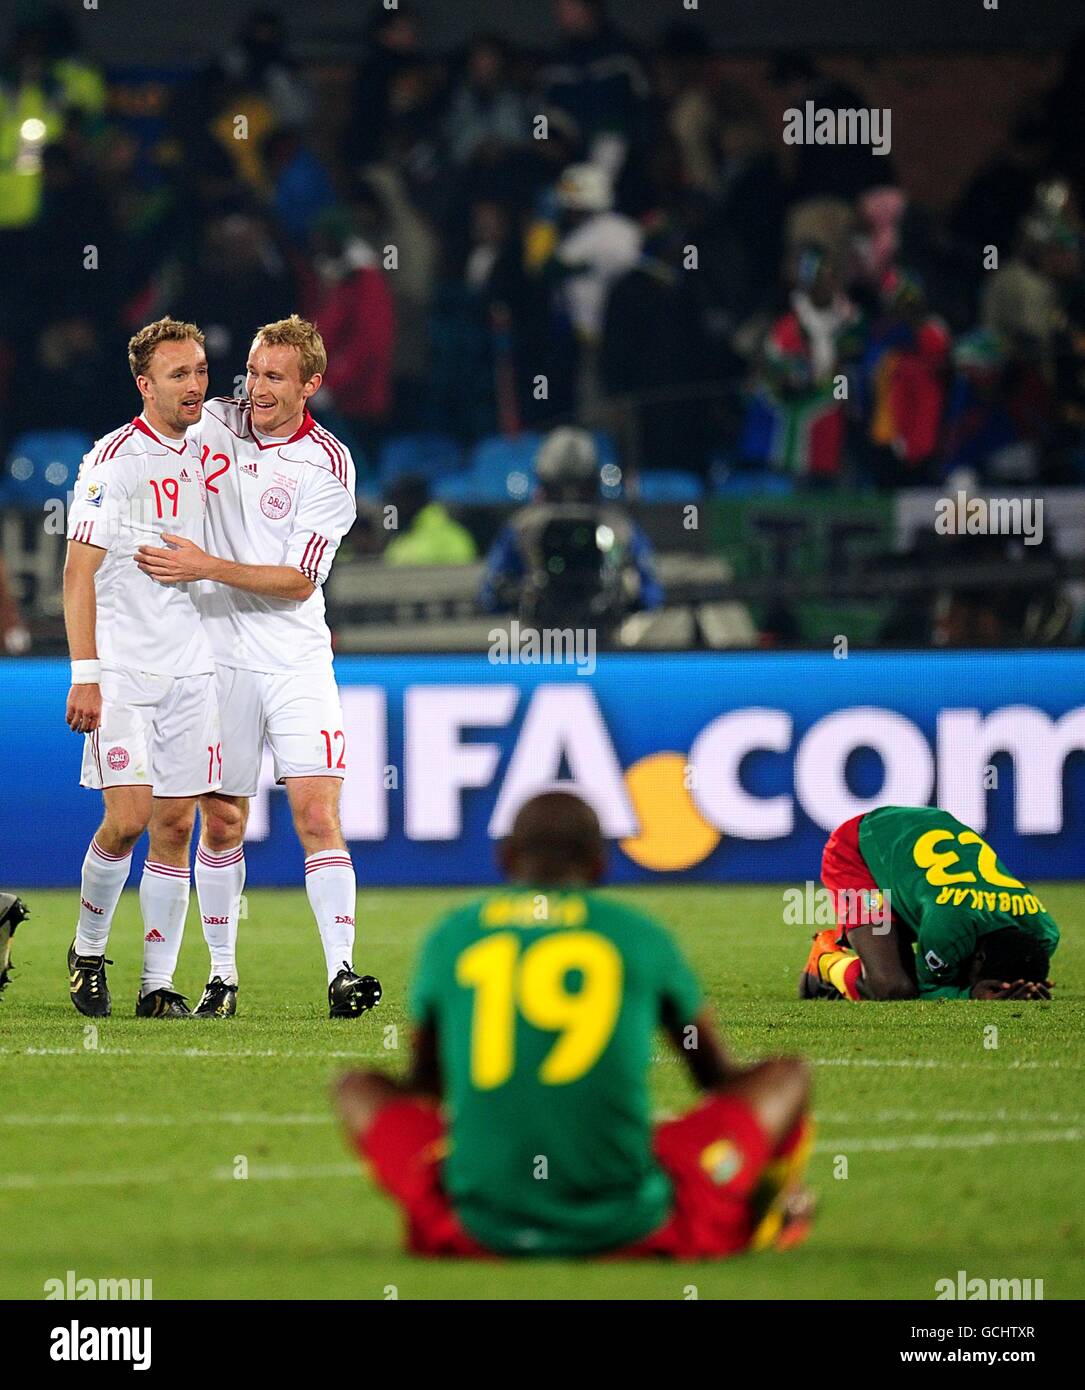 Cameroon's Stephane M'bia Etoundi (19) and Vincent Aboubakar (far right) dejected as Denmark's Thomas Kahlenberg (12) and Dennis Rommedahl (left) celebrate victory after the final whistle Stock Photo